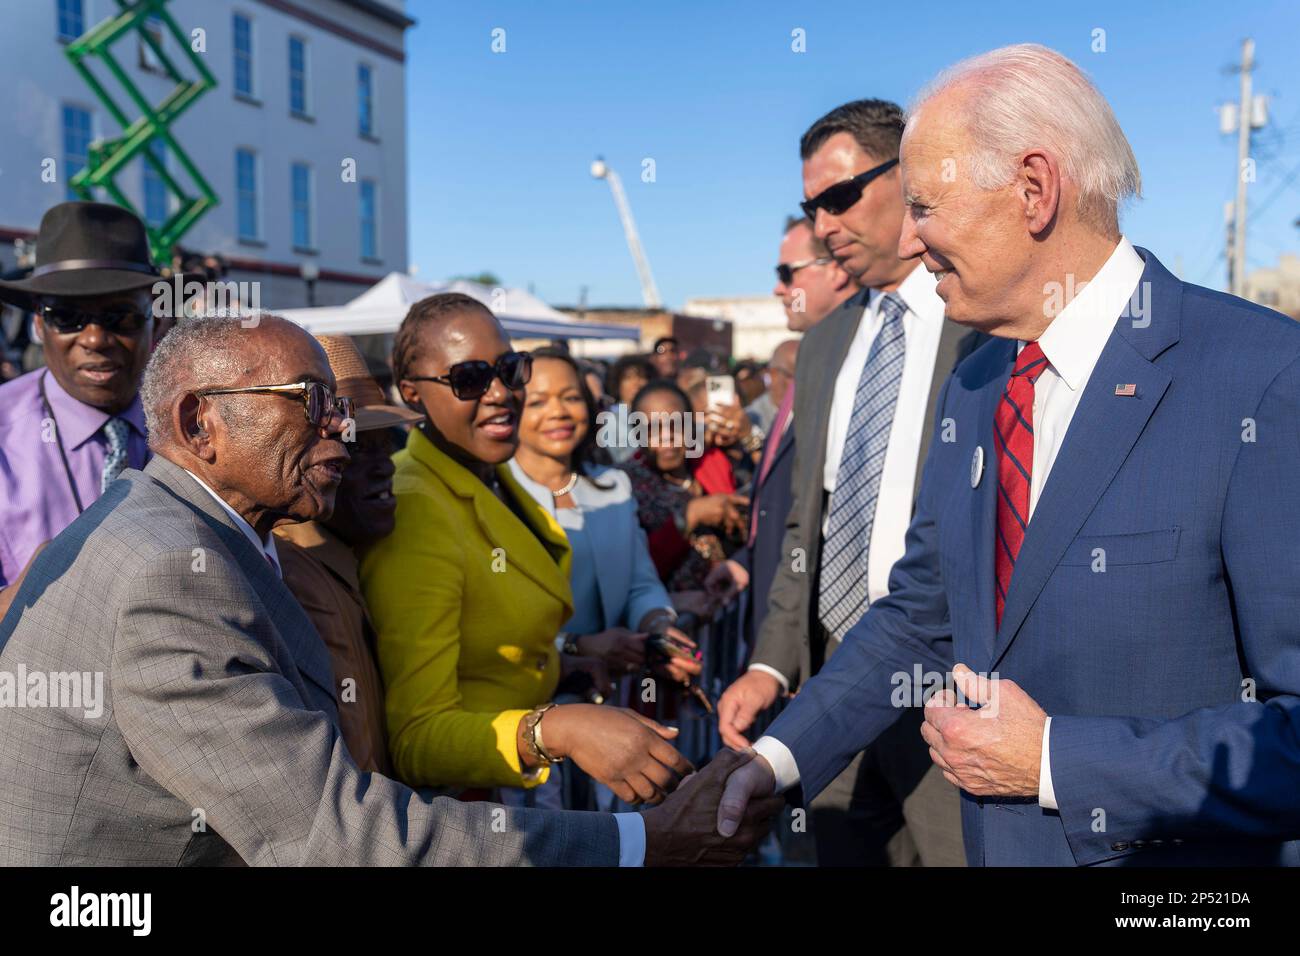 Selma, United States Of America. 05th Mar, 2023. Selma, United States of America. 05 March, 2023. U.S President Joe Biden, right, greets activists after walking across the Edmund Pettus Bridge to mark the 58th anniversary of the Bloody Sunday civil rights event, March 5, 2023 in Selma, Alabama. Credit: Adam Schultz/White House Photo/Alamy Live News Stock Photo